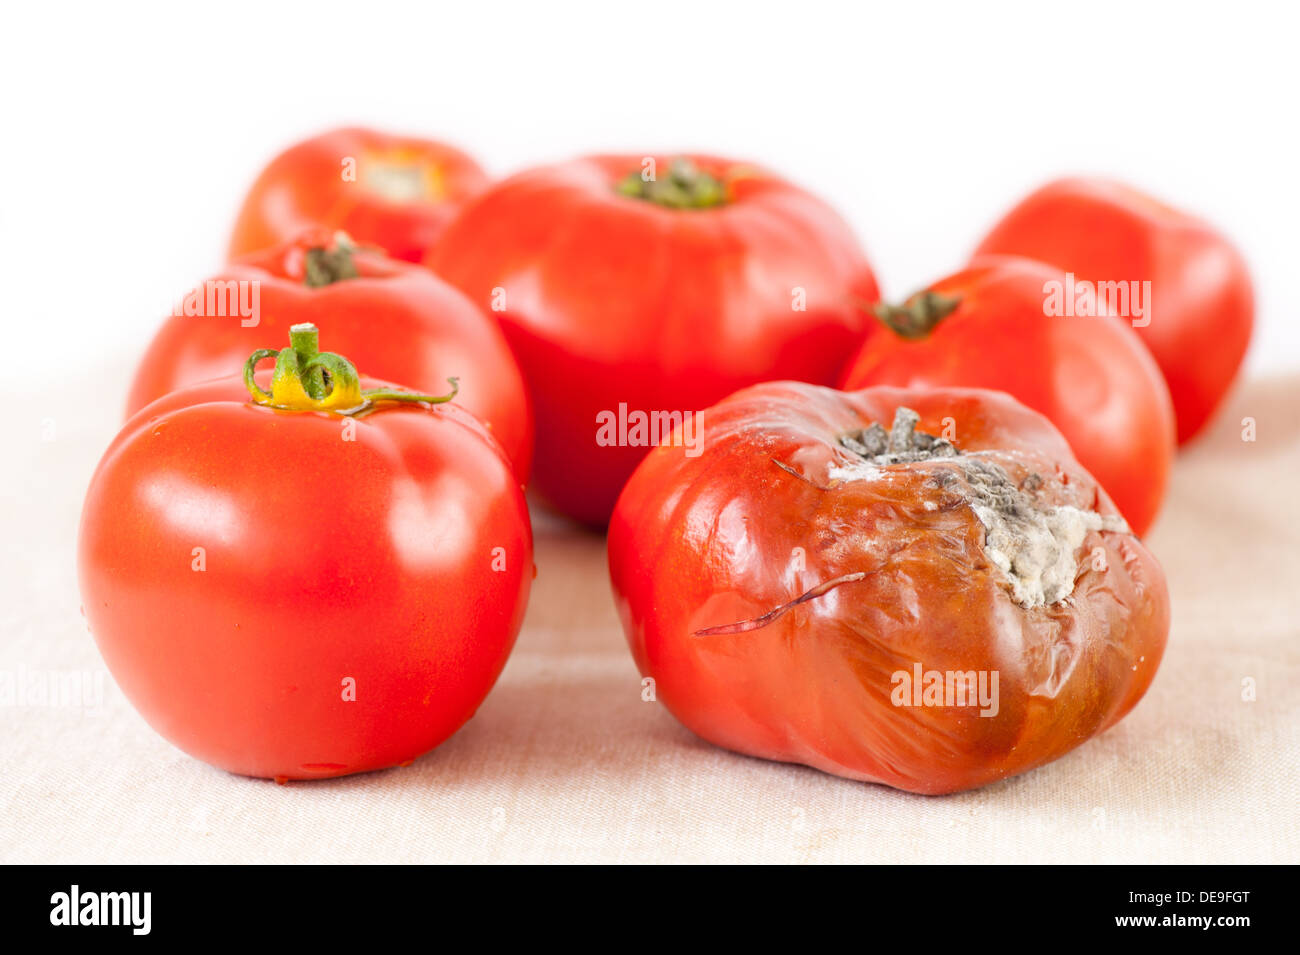 tomato with toxic mold and good fresh fruits Stock Photo